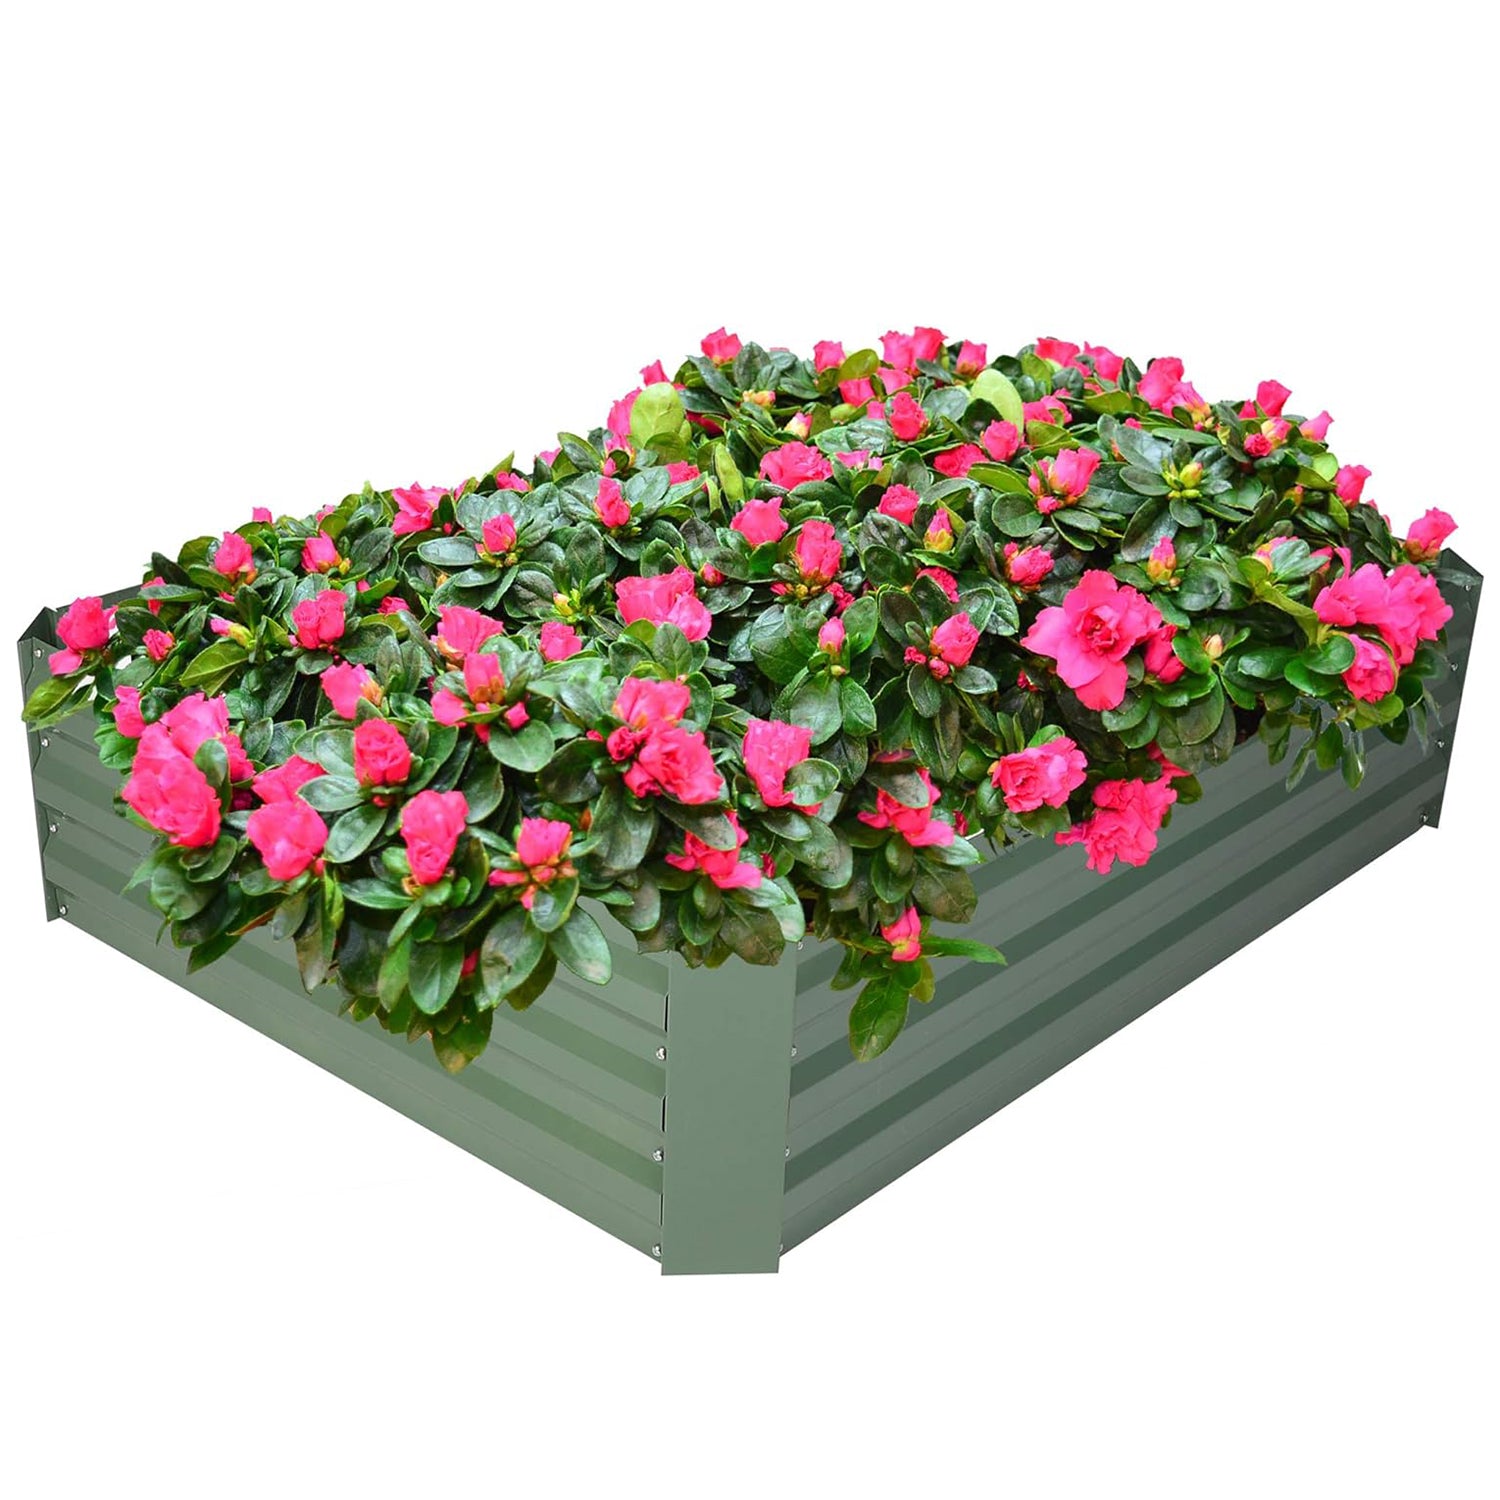 48"x36"x12" Raised Garden Bed Galvanized Planter Box Anti-Rust Coating Planting Vegetables Herbs and Flowers